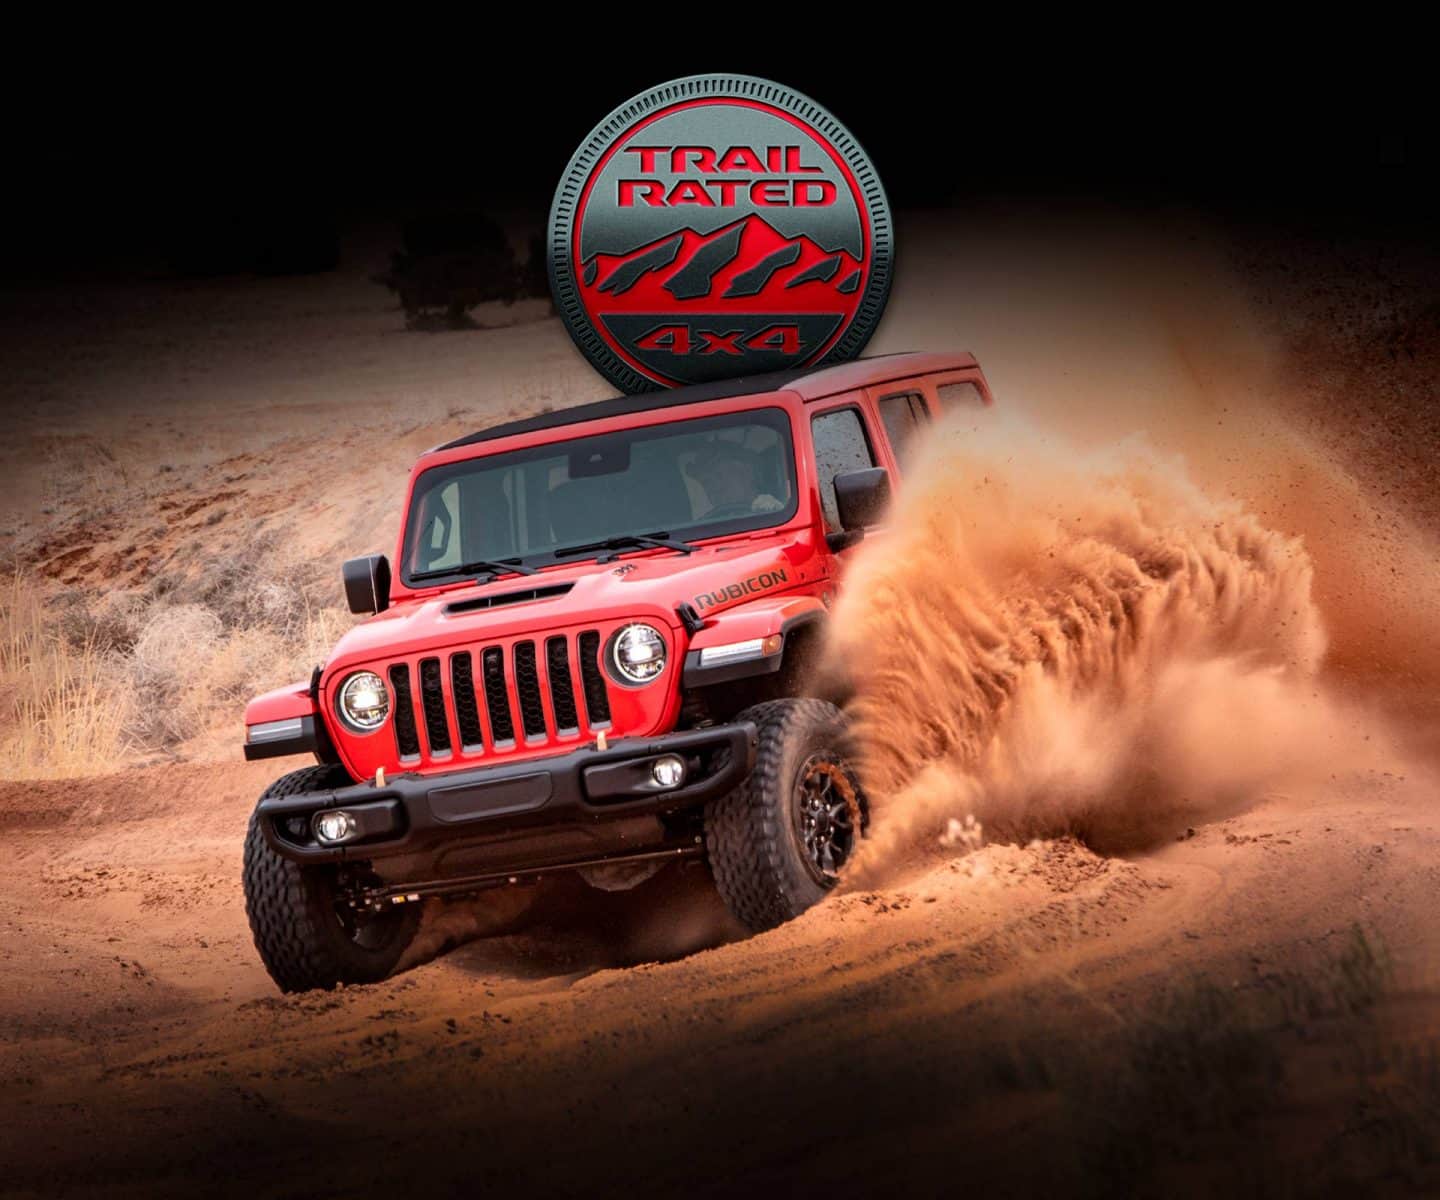 The 2023 Jeep Wrangler Rubicon 392 descending a dune in the desert as sand is kicked up to the top of the side windows. The Trail Rated 4x4 badge.